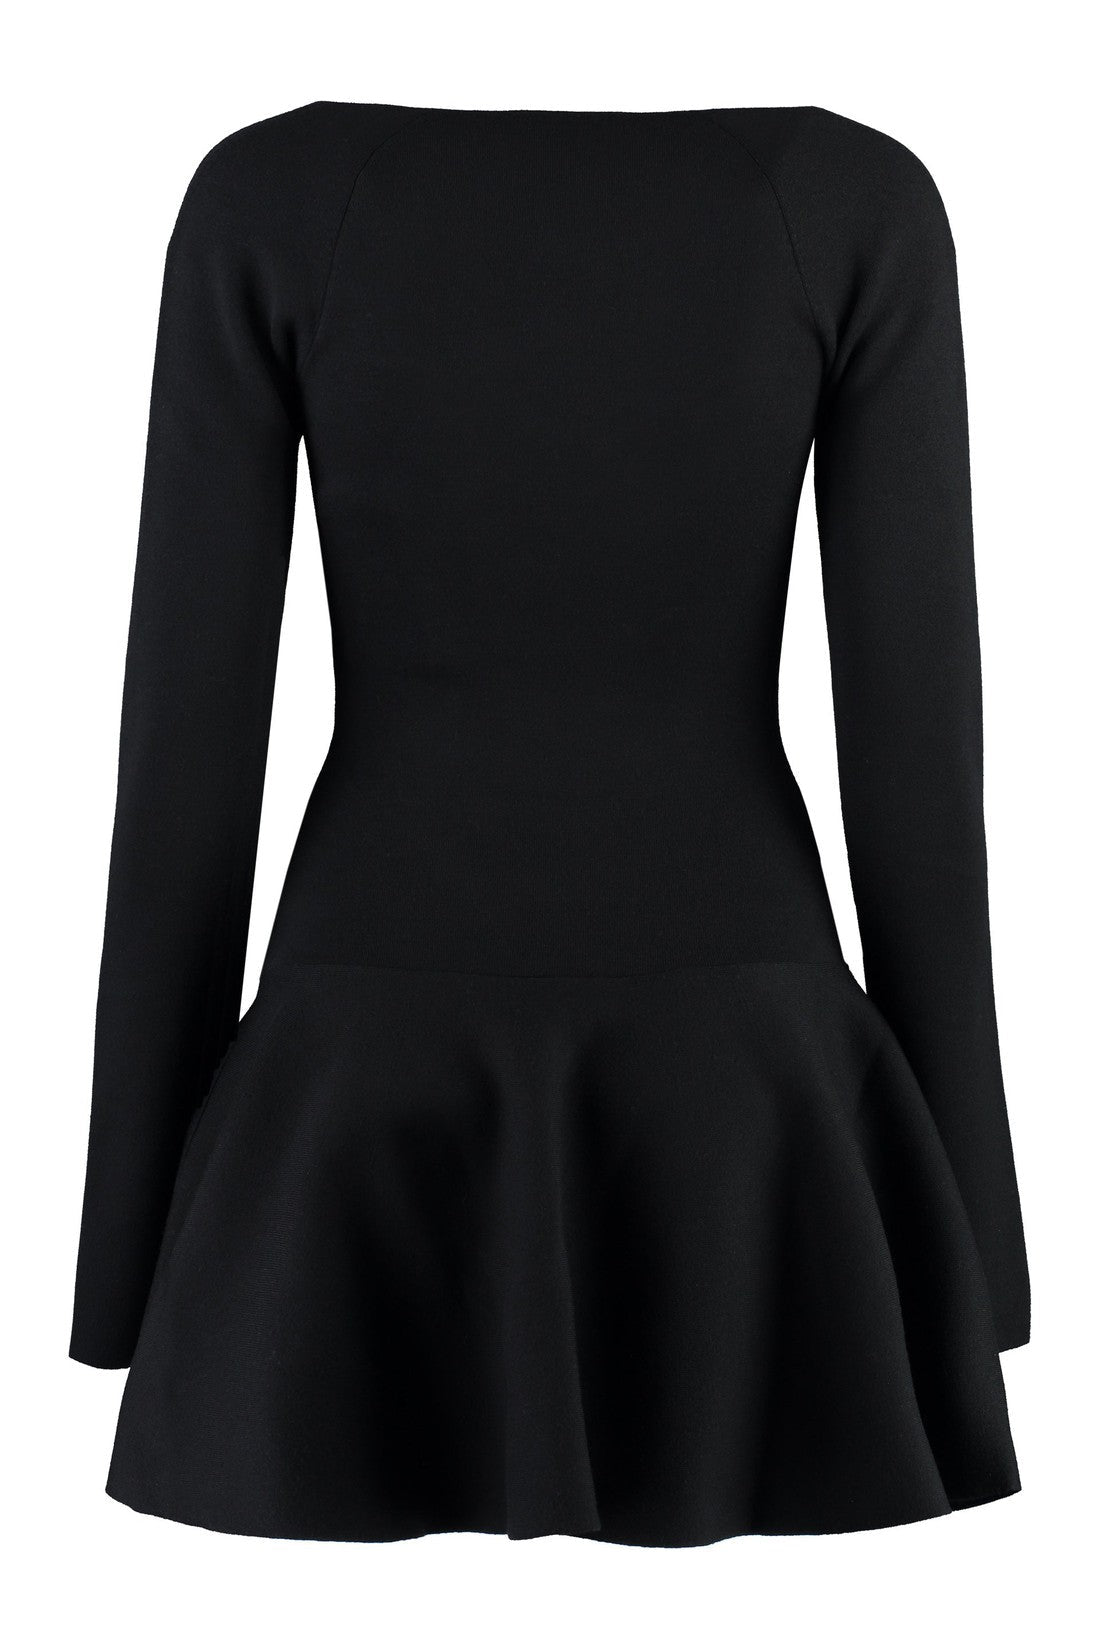 Nina Ricci-OUTLET-SALE-Knitted dress-ARCHIVIST